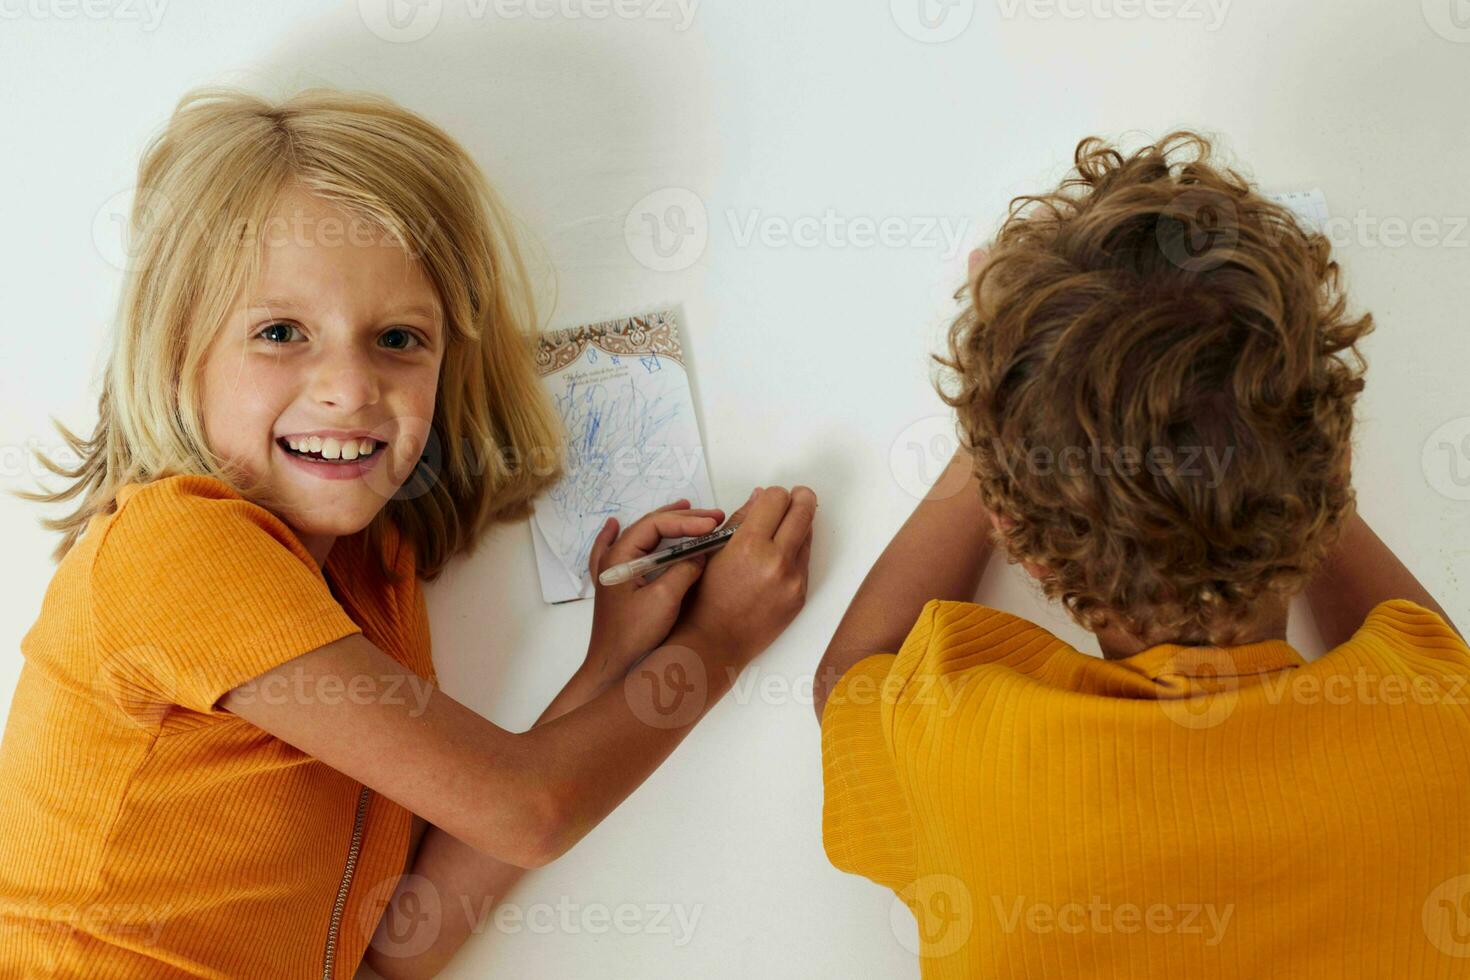 Small children emotions drawing together notepad and pencils isolated background unaltered photo